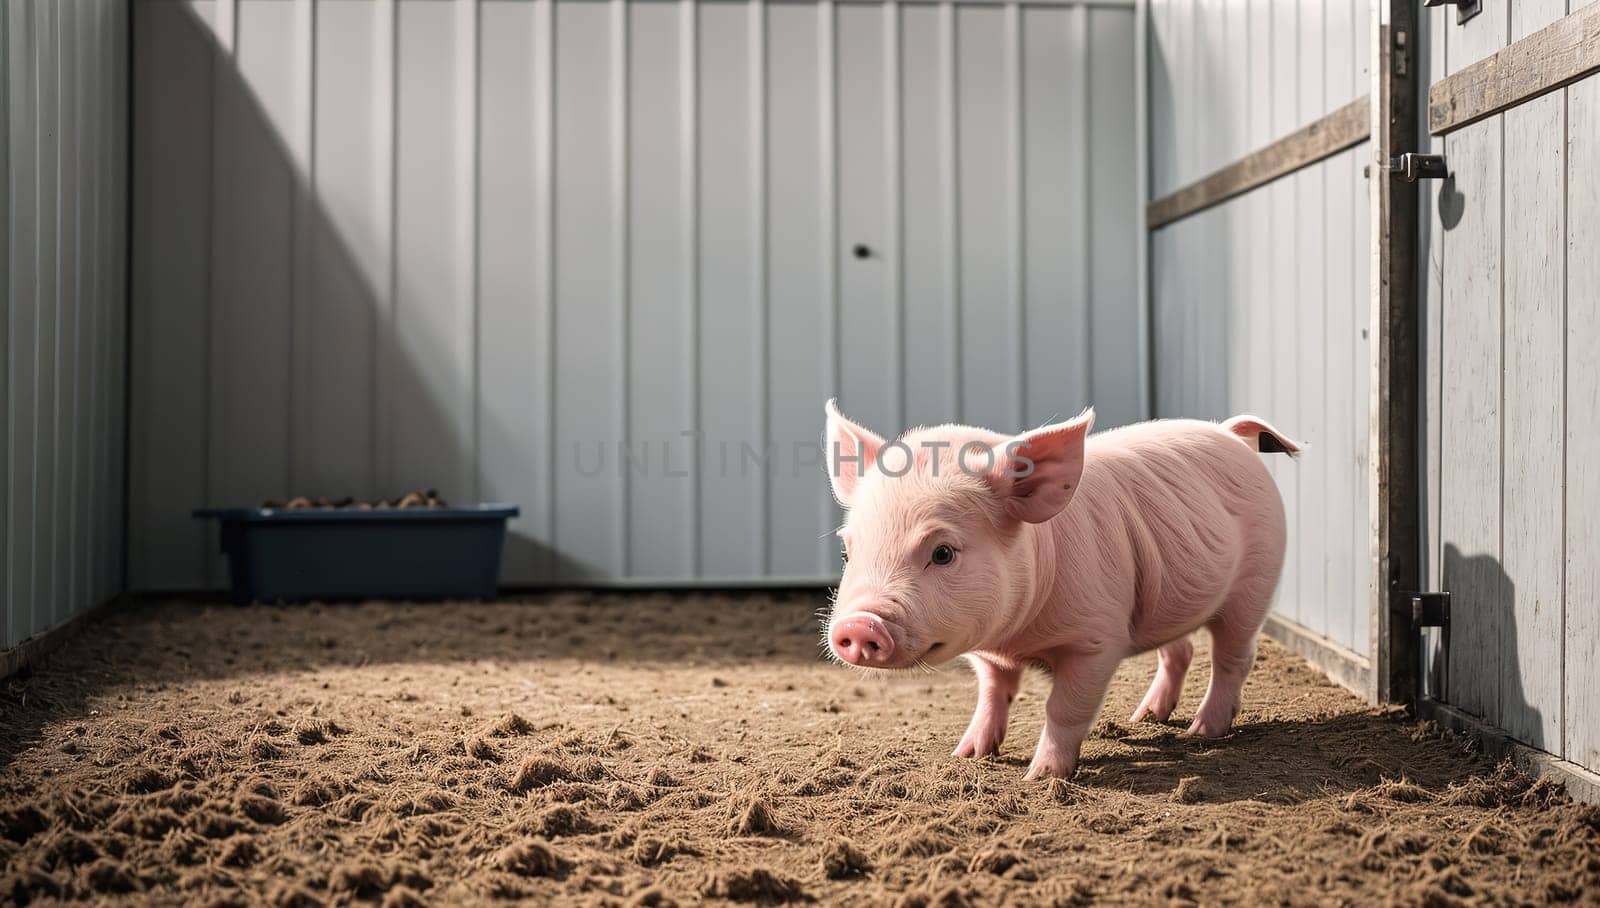 The image shows a small pig standing in a barn, looking out at the viewer.